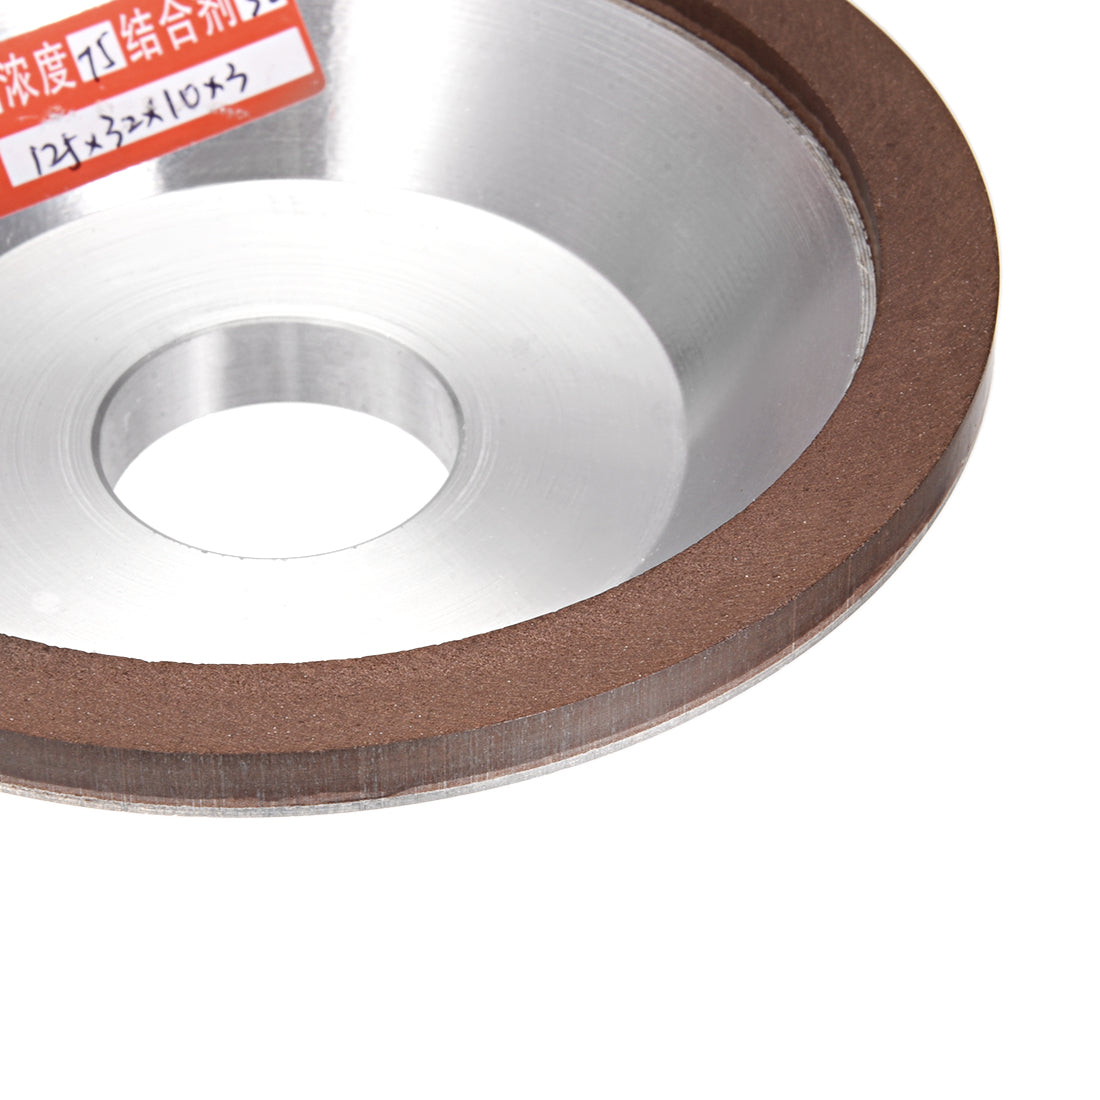 Uxcell Uxcell 5-inch Flaring Cup Diamond Grinding Wheels Resin Bonded Abrasive Wheel 240 Grits